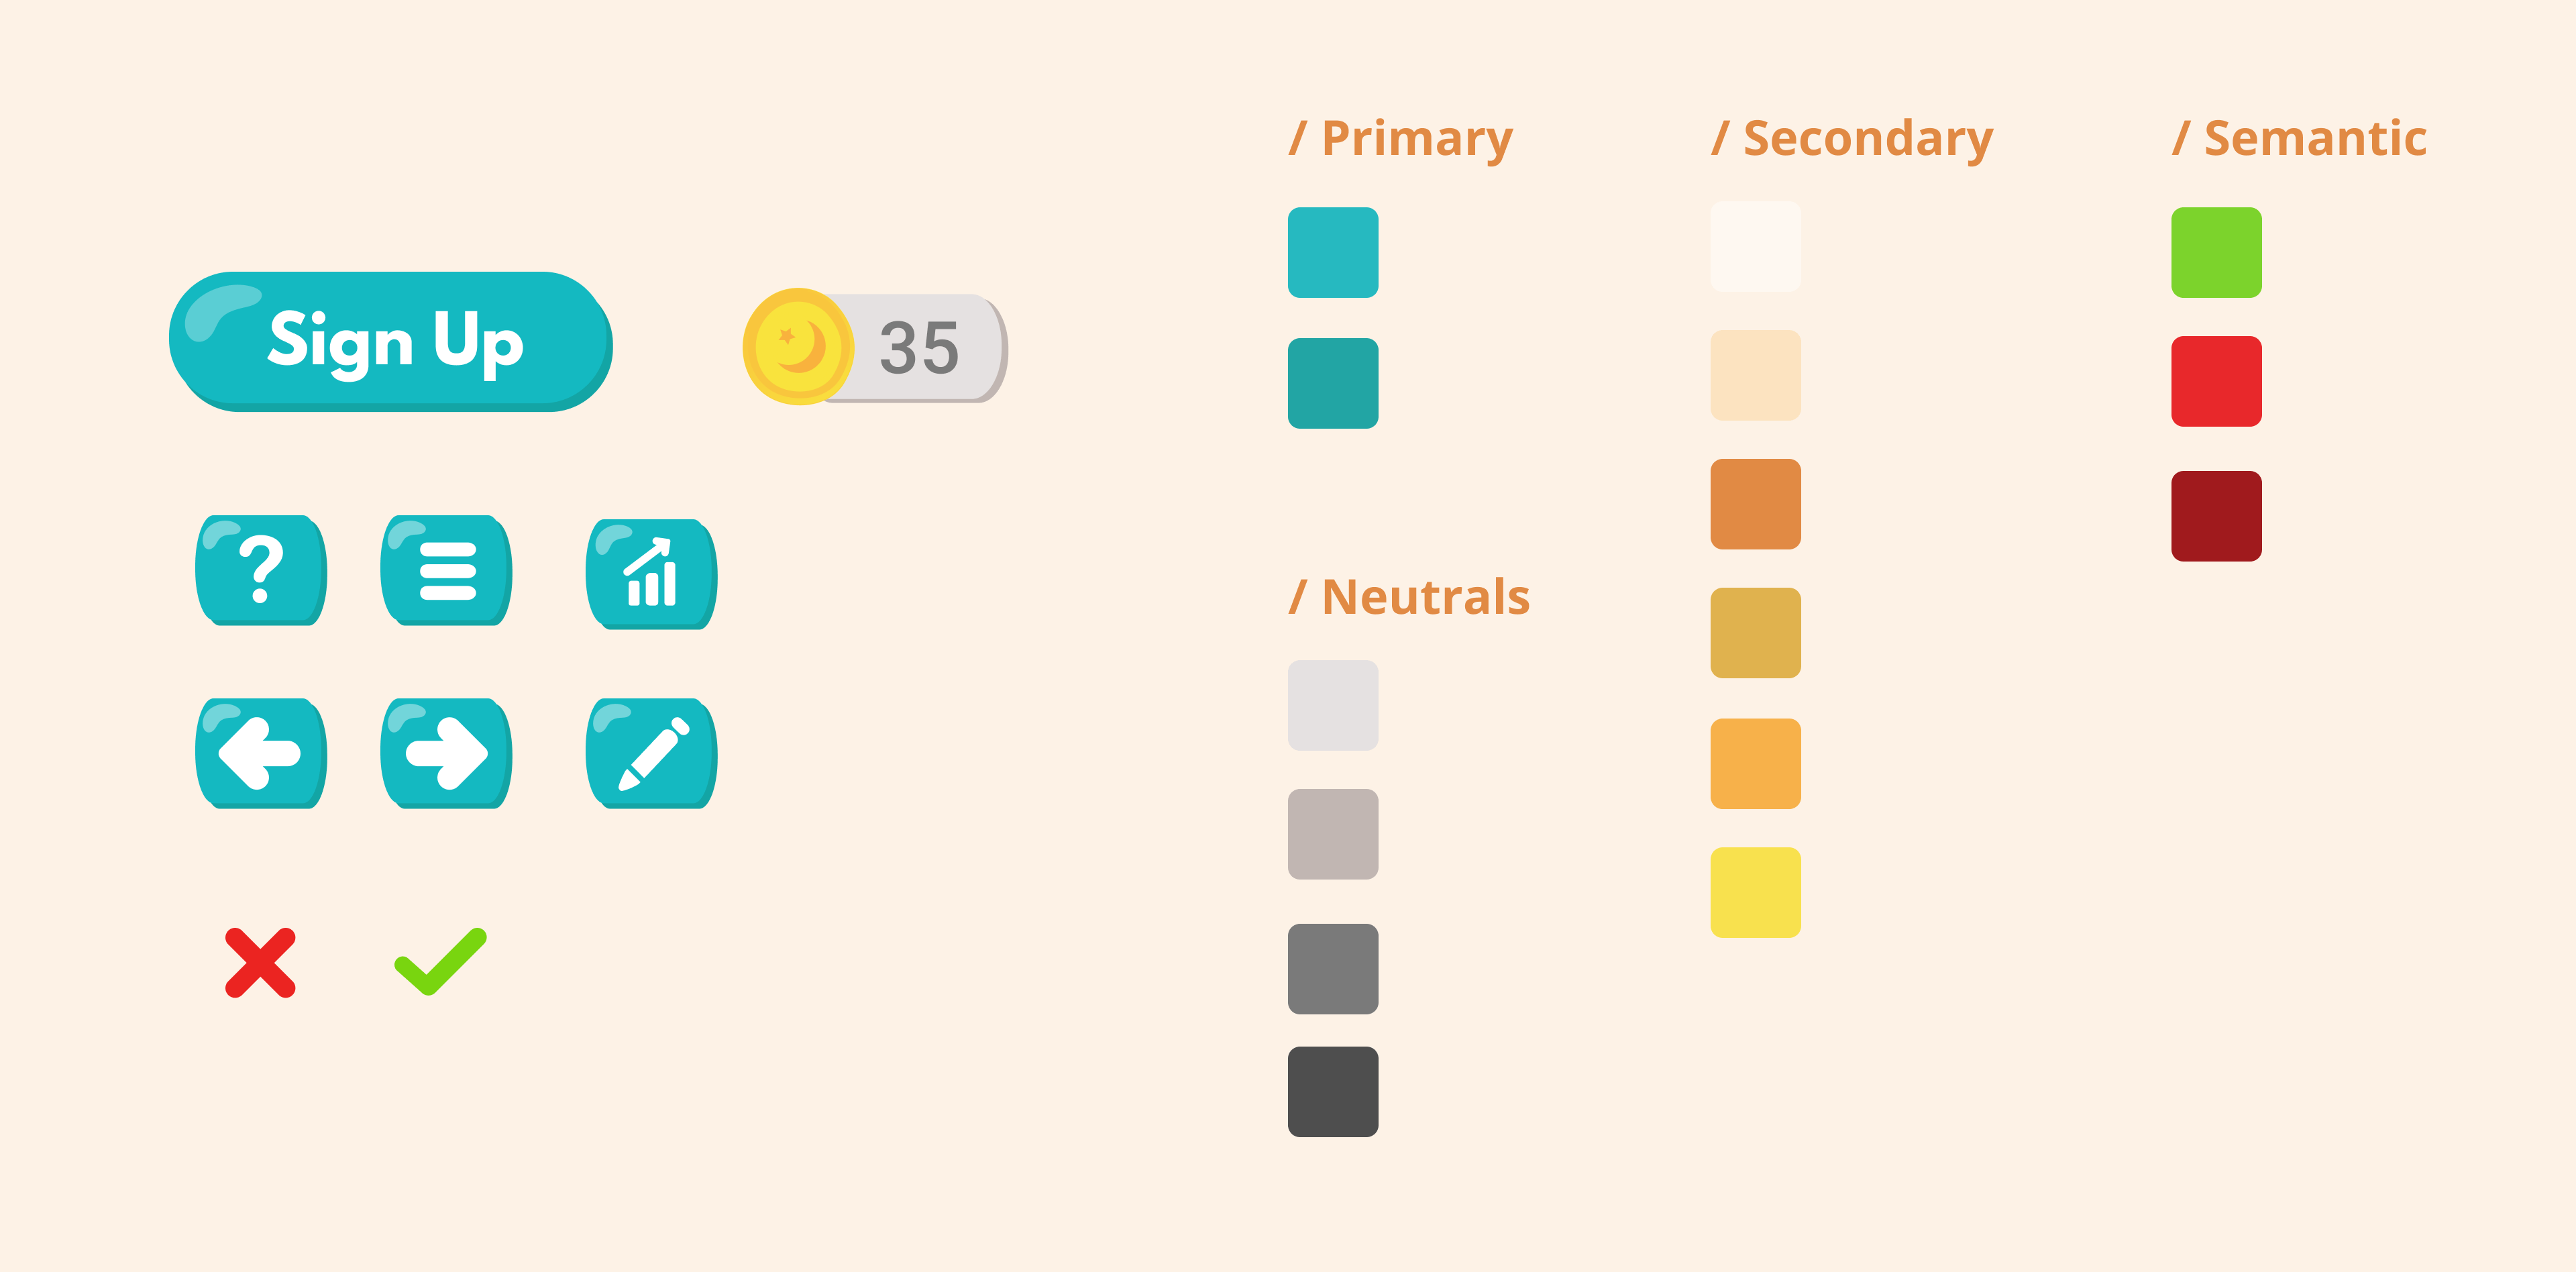 Branding - UI Components and Color Scheme